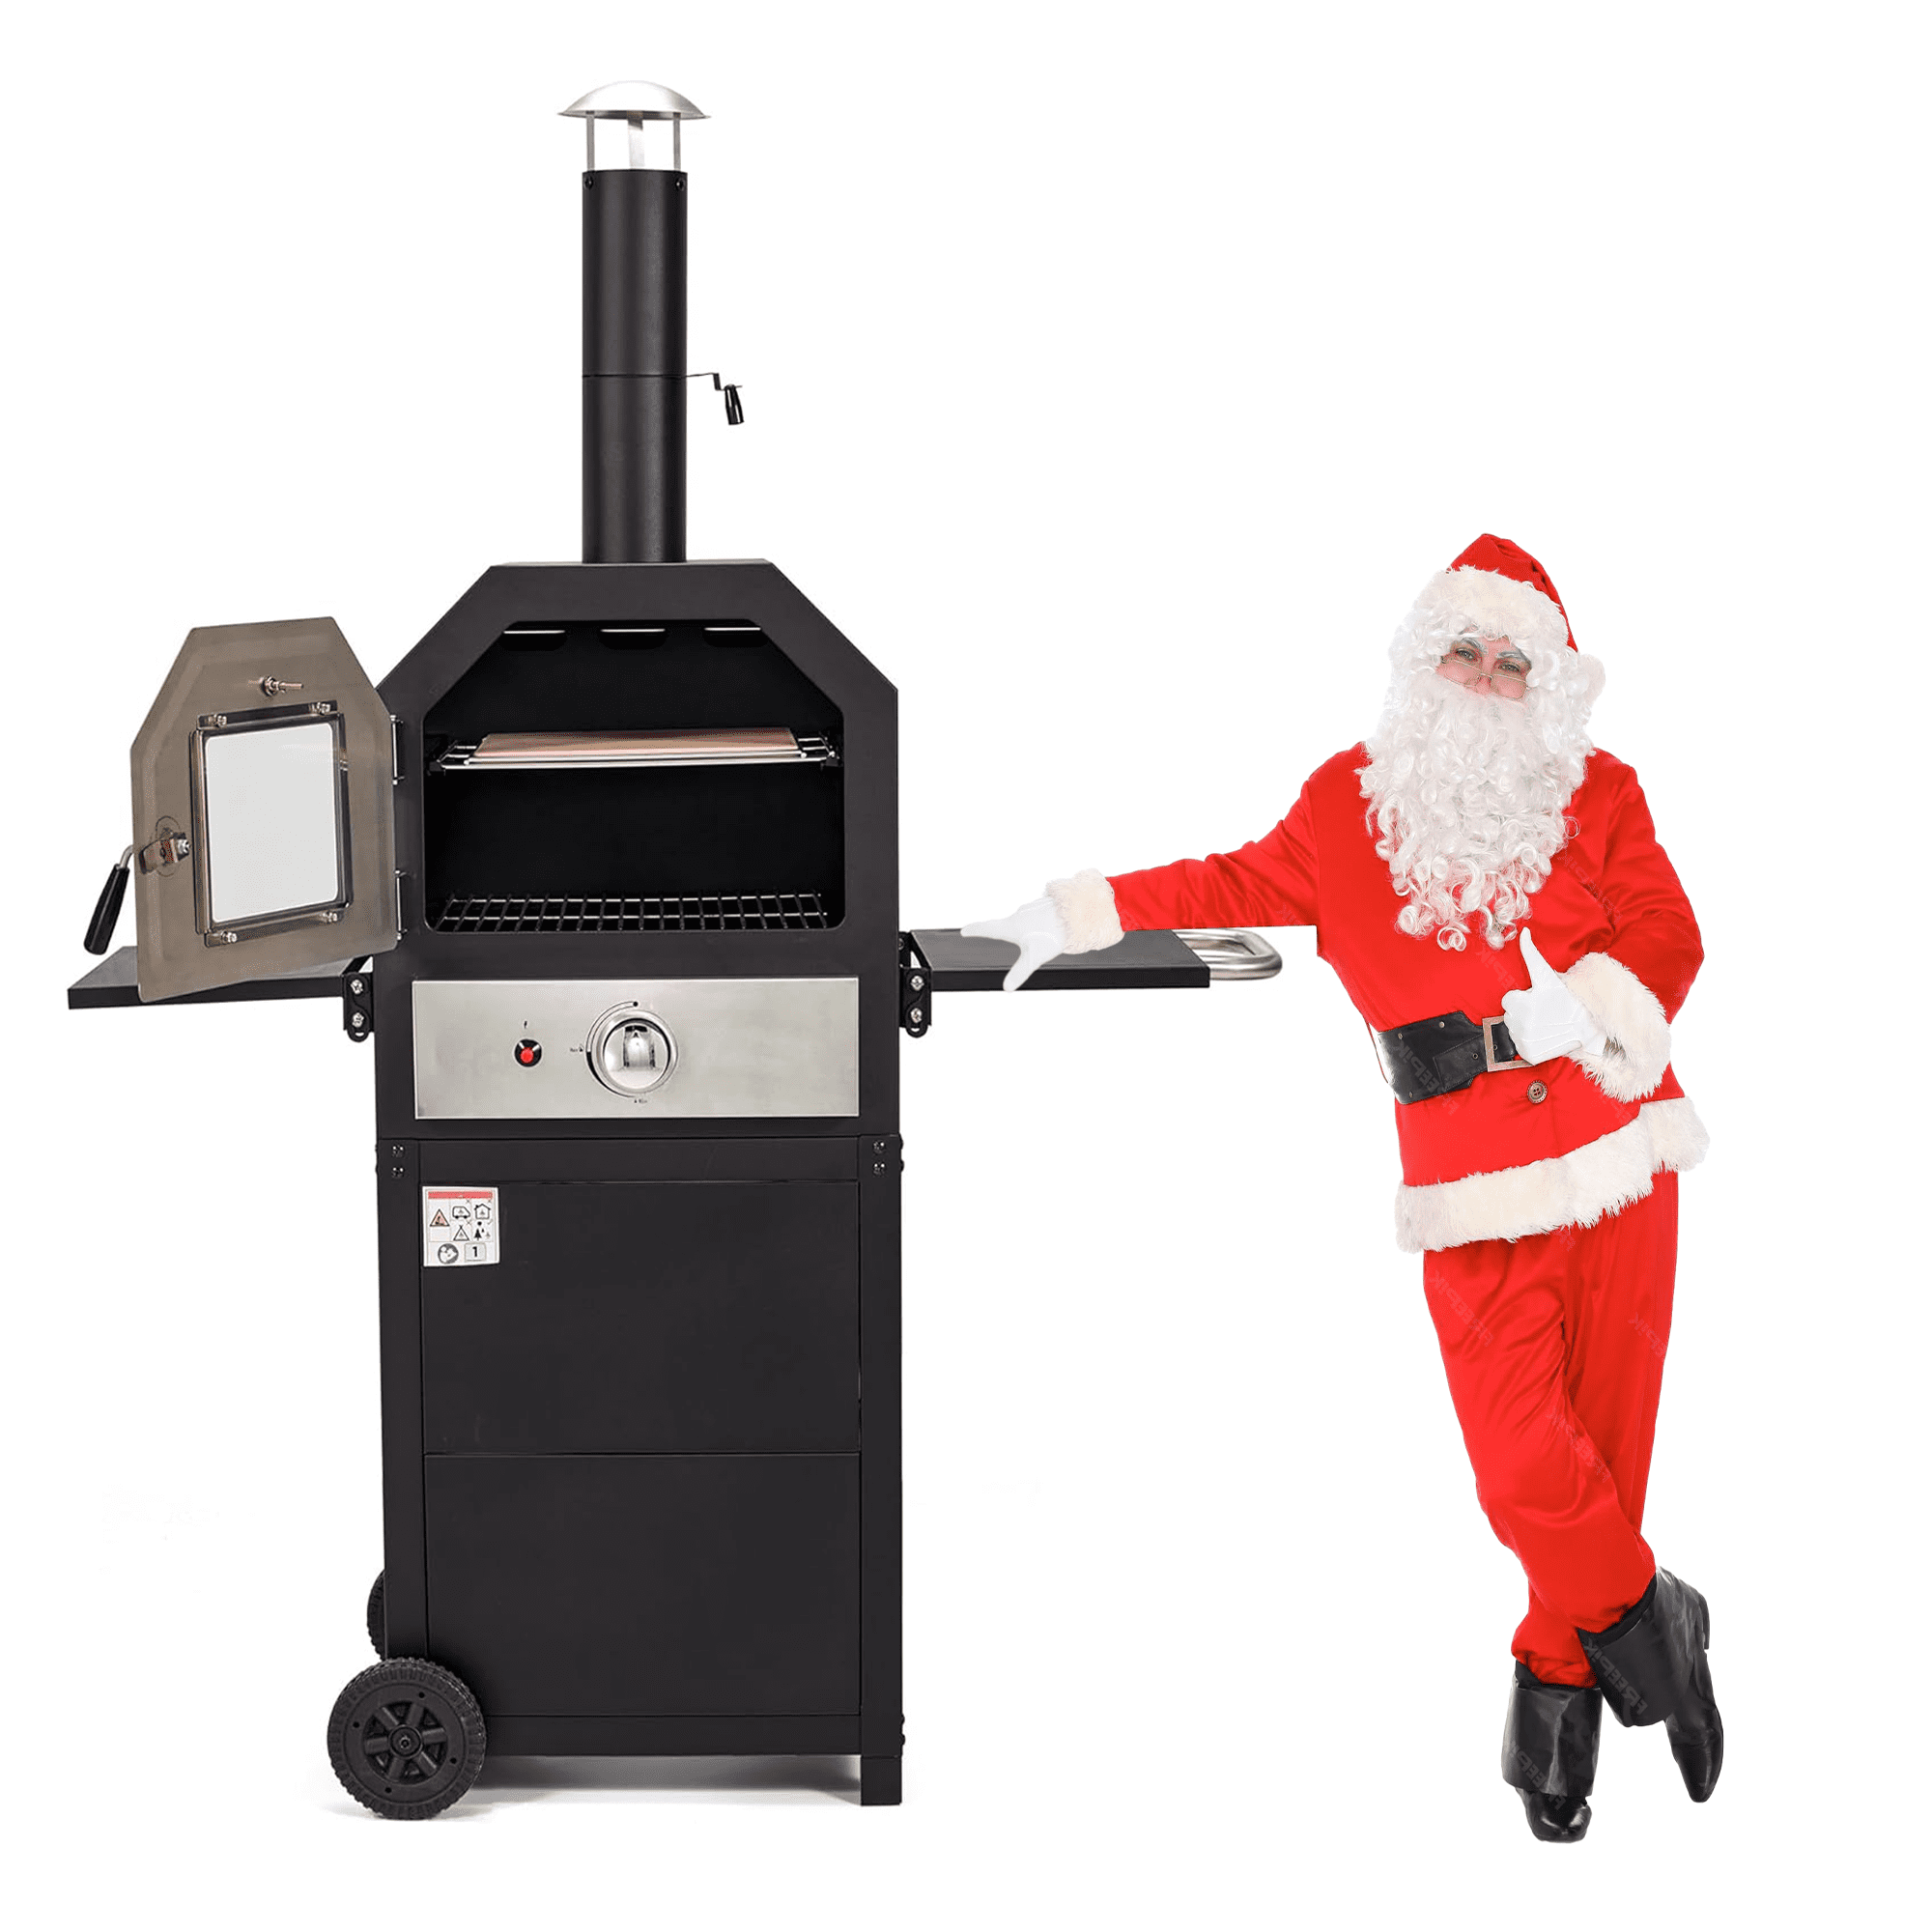 Ninja Woodfire 8-in-1 Outdoor Pizza Oven, 700°F High-Heat Roaster, BBQ  Smoker with Woodfire Technology, Includes Cover & Pizza Peel, Electric -  Sam's Club